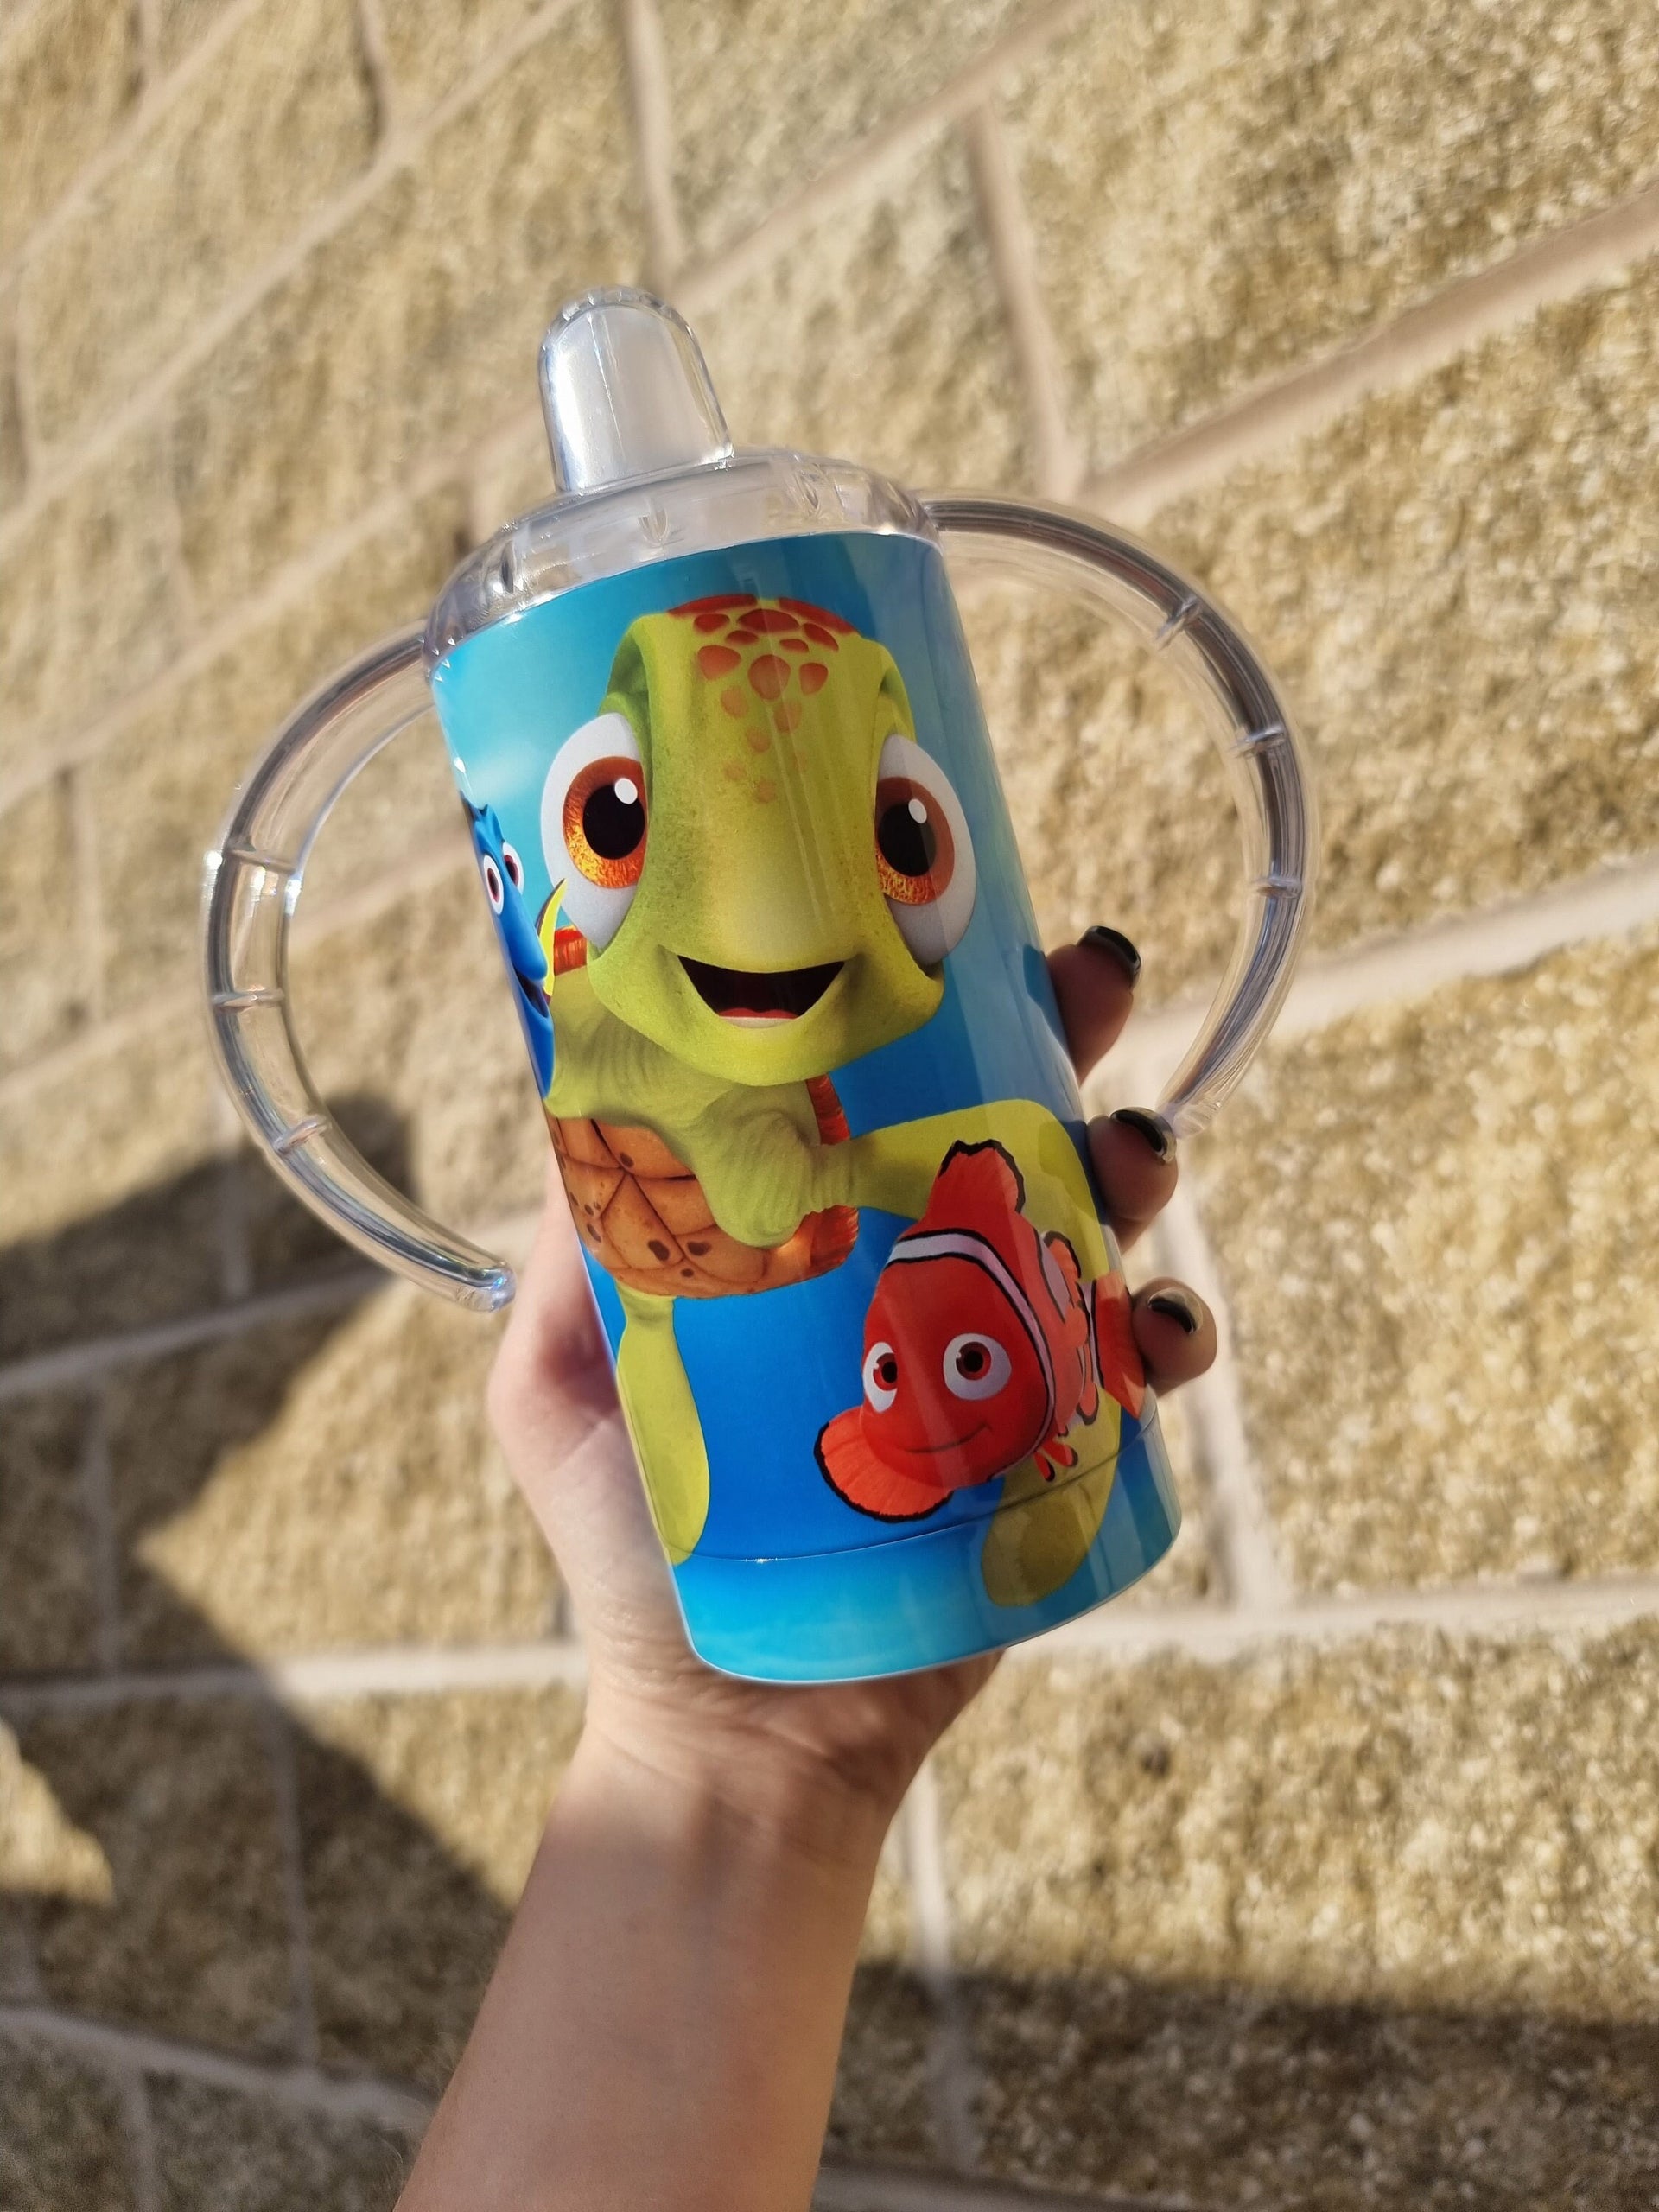 Disney / Pixar Finding Nemo 2-pk. Insulated Sippy Cups by The